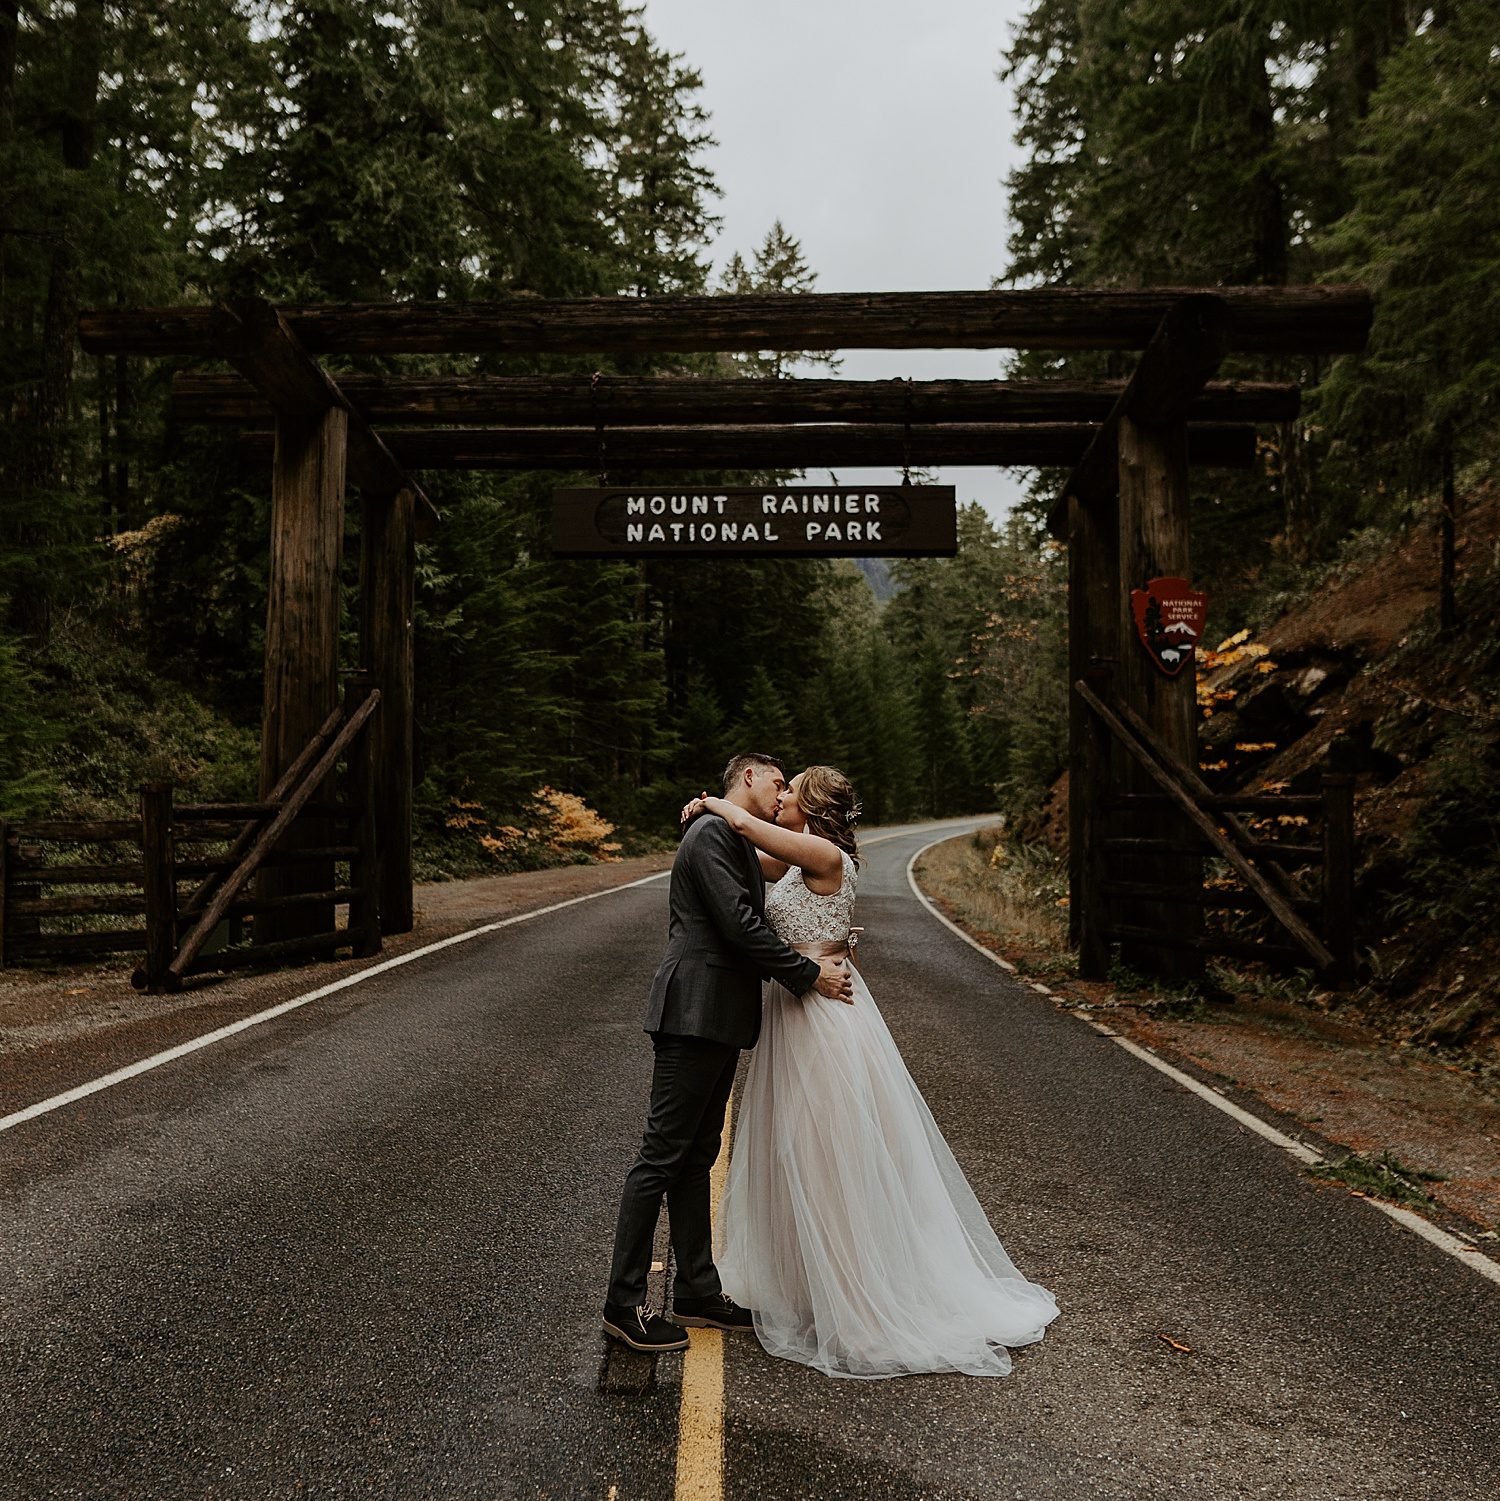 Newly married couple kissing in front of the Mount Rainier National Park sign